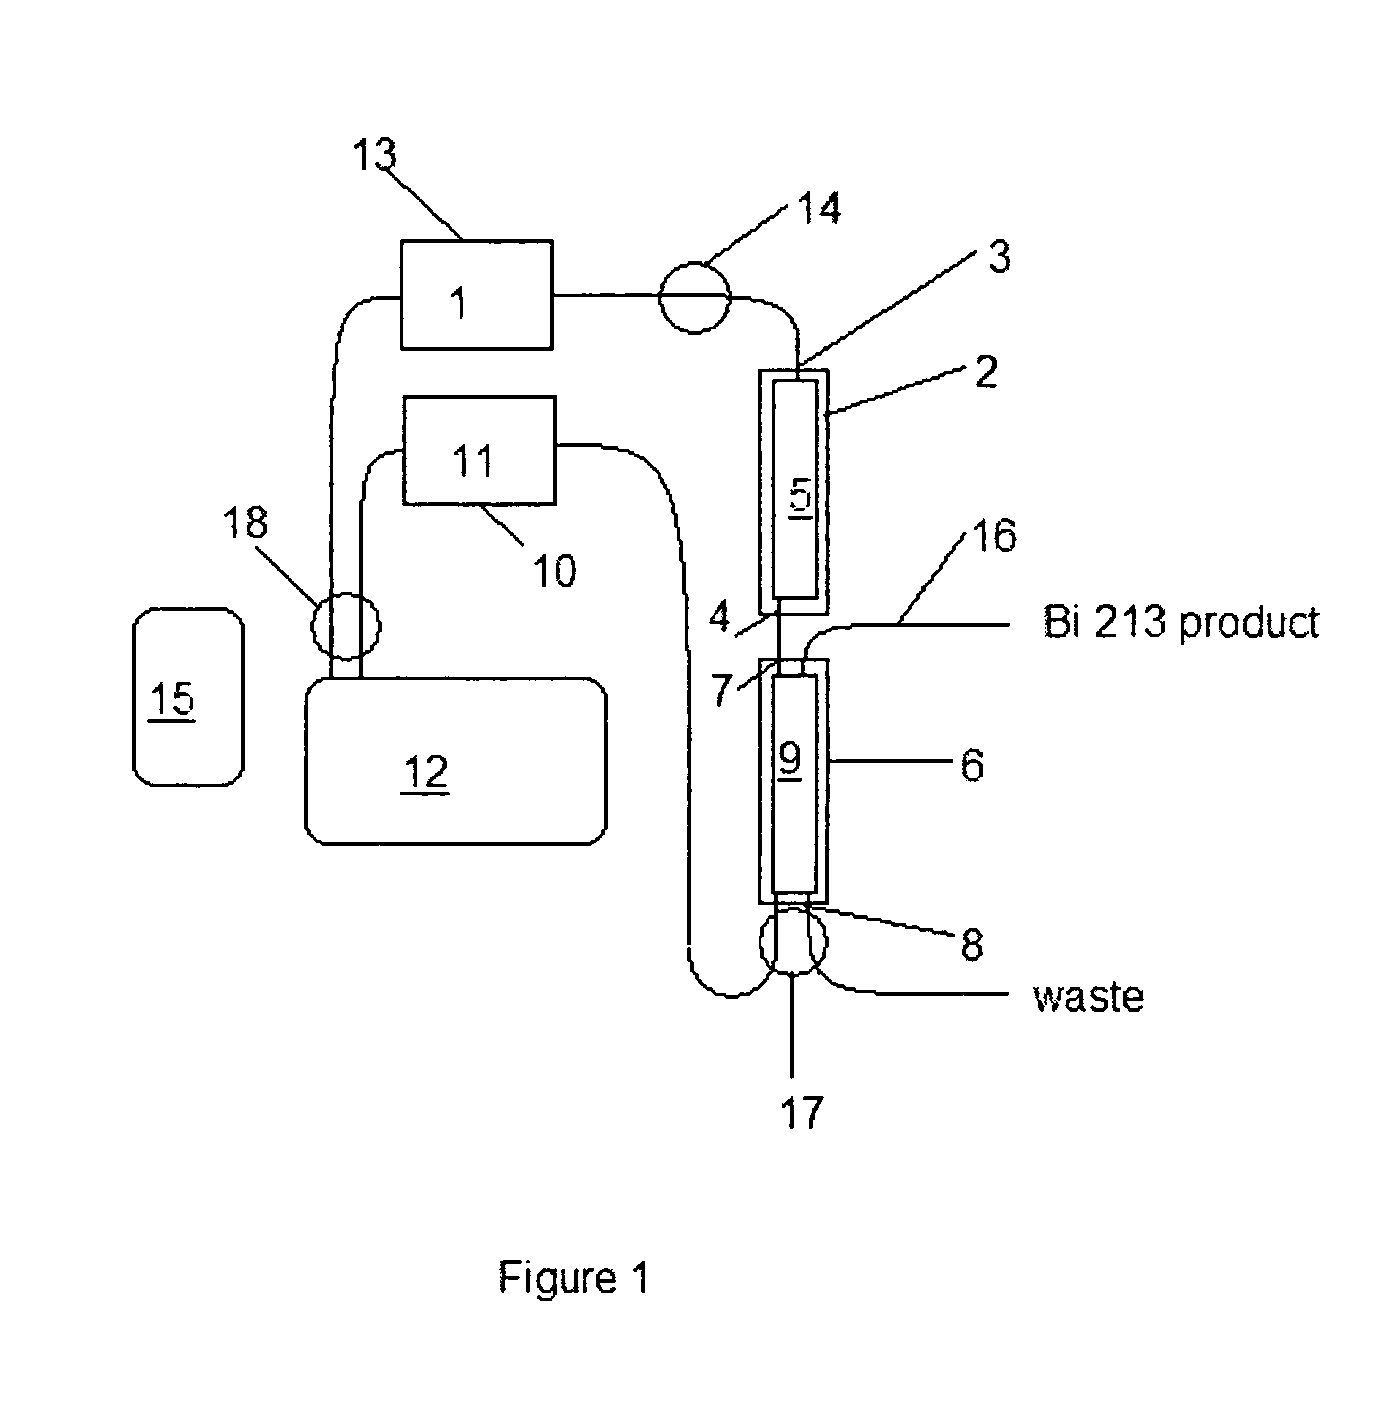 Method and apparatus for production of 213Bi from a high activity 225Ac source